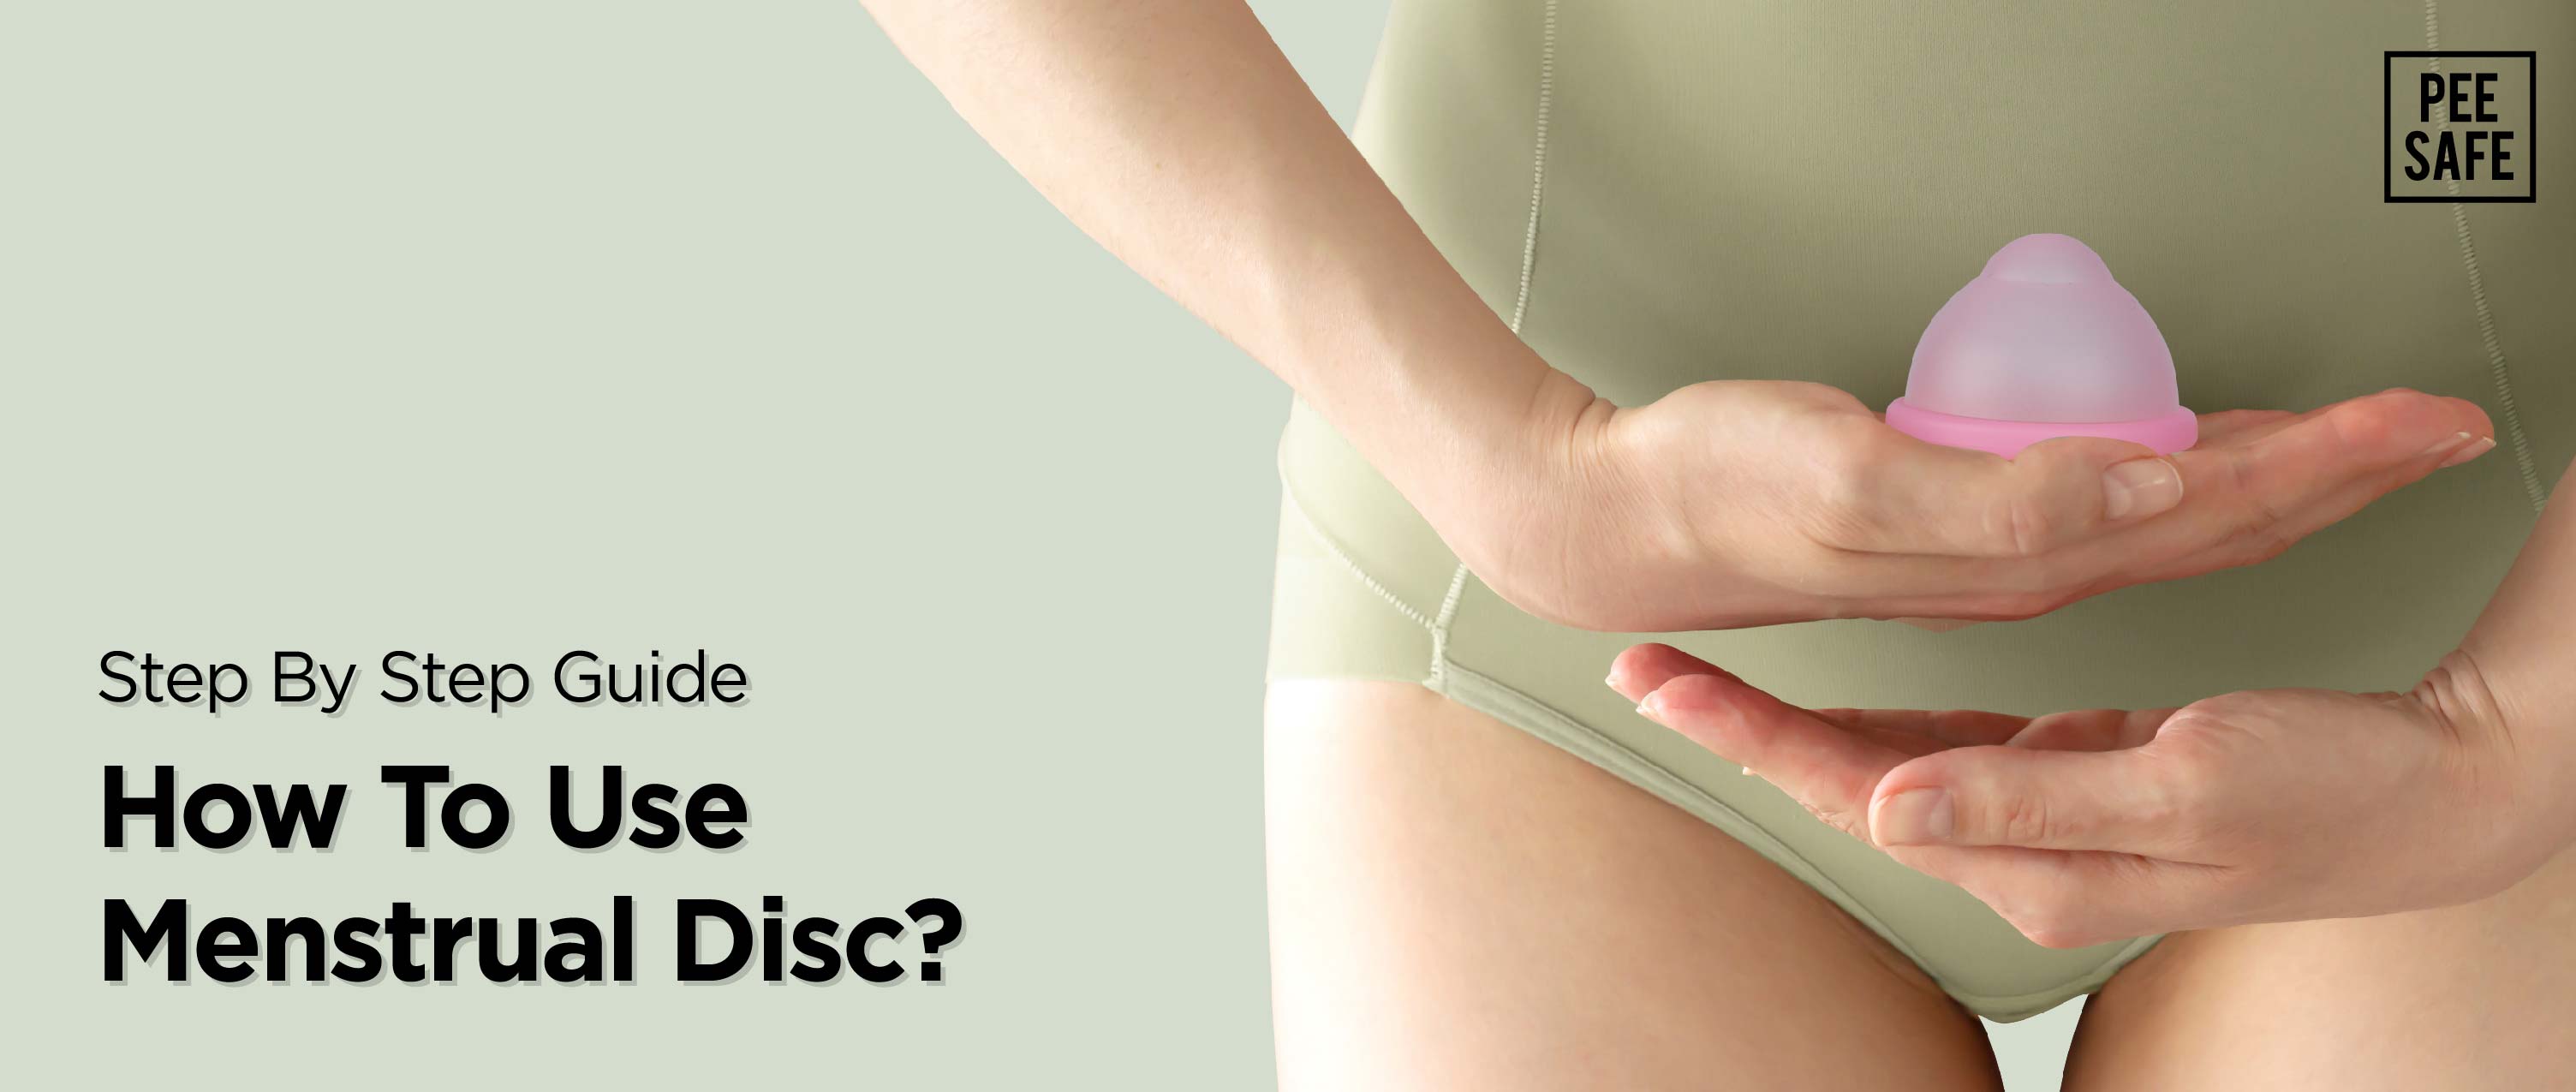 Step By Step Guide: How To Use Menstrual Disc?